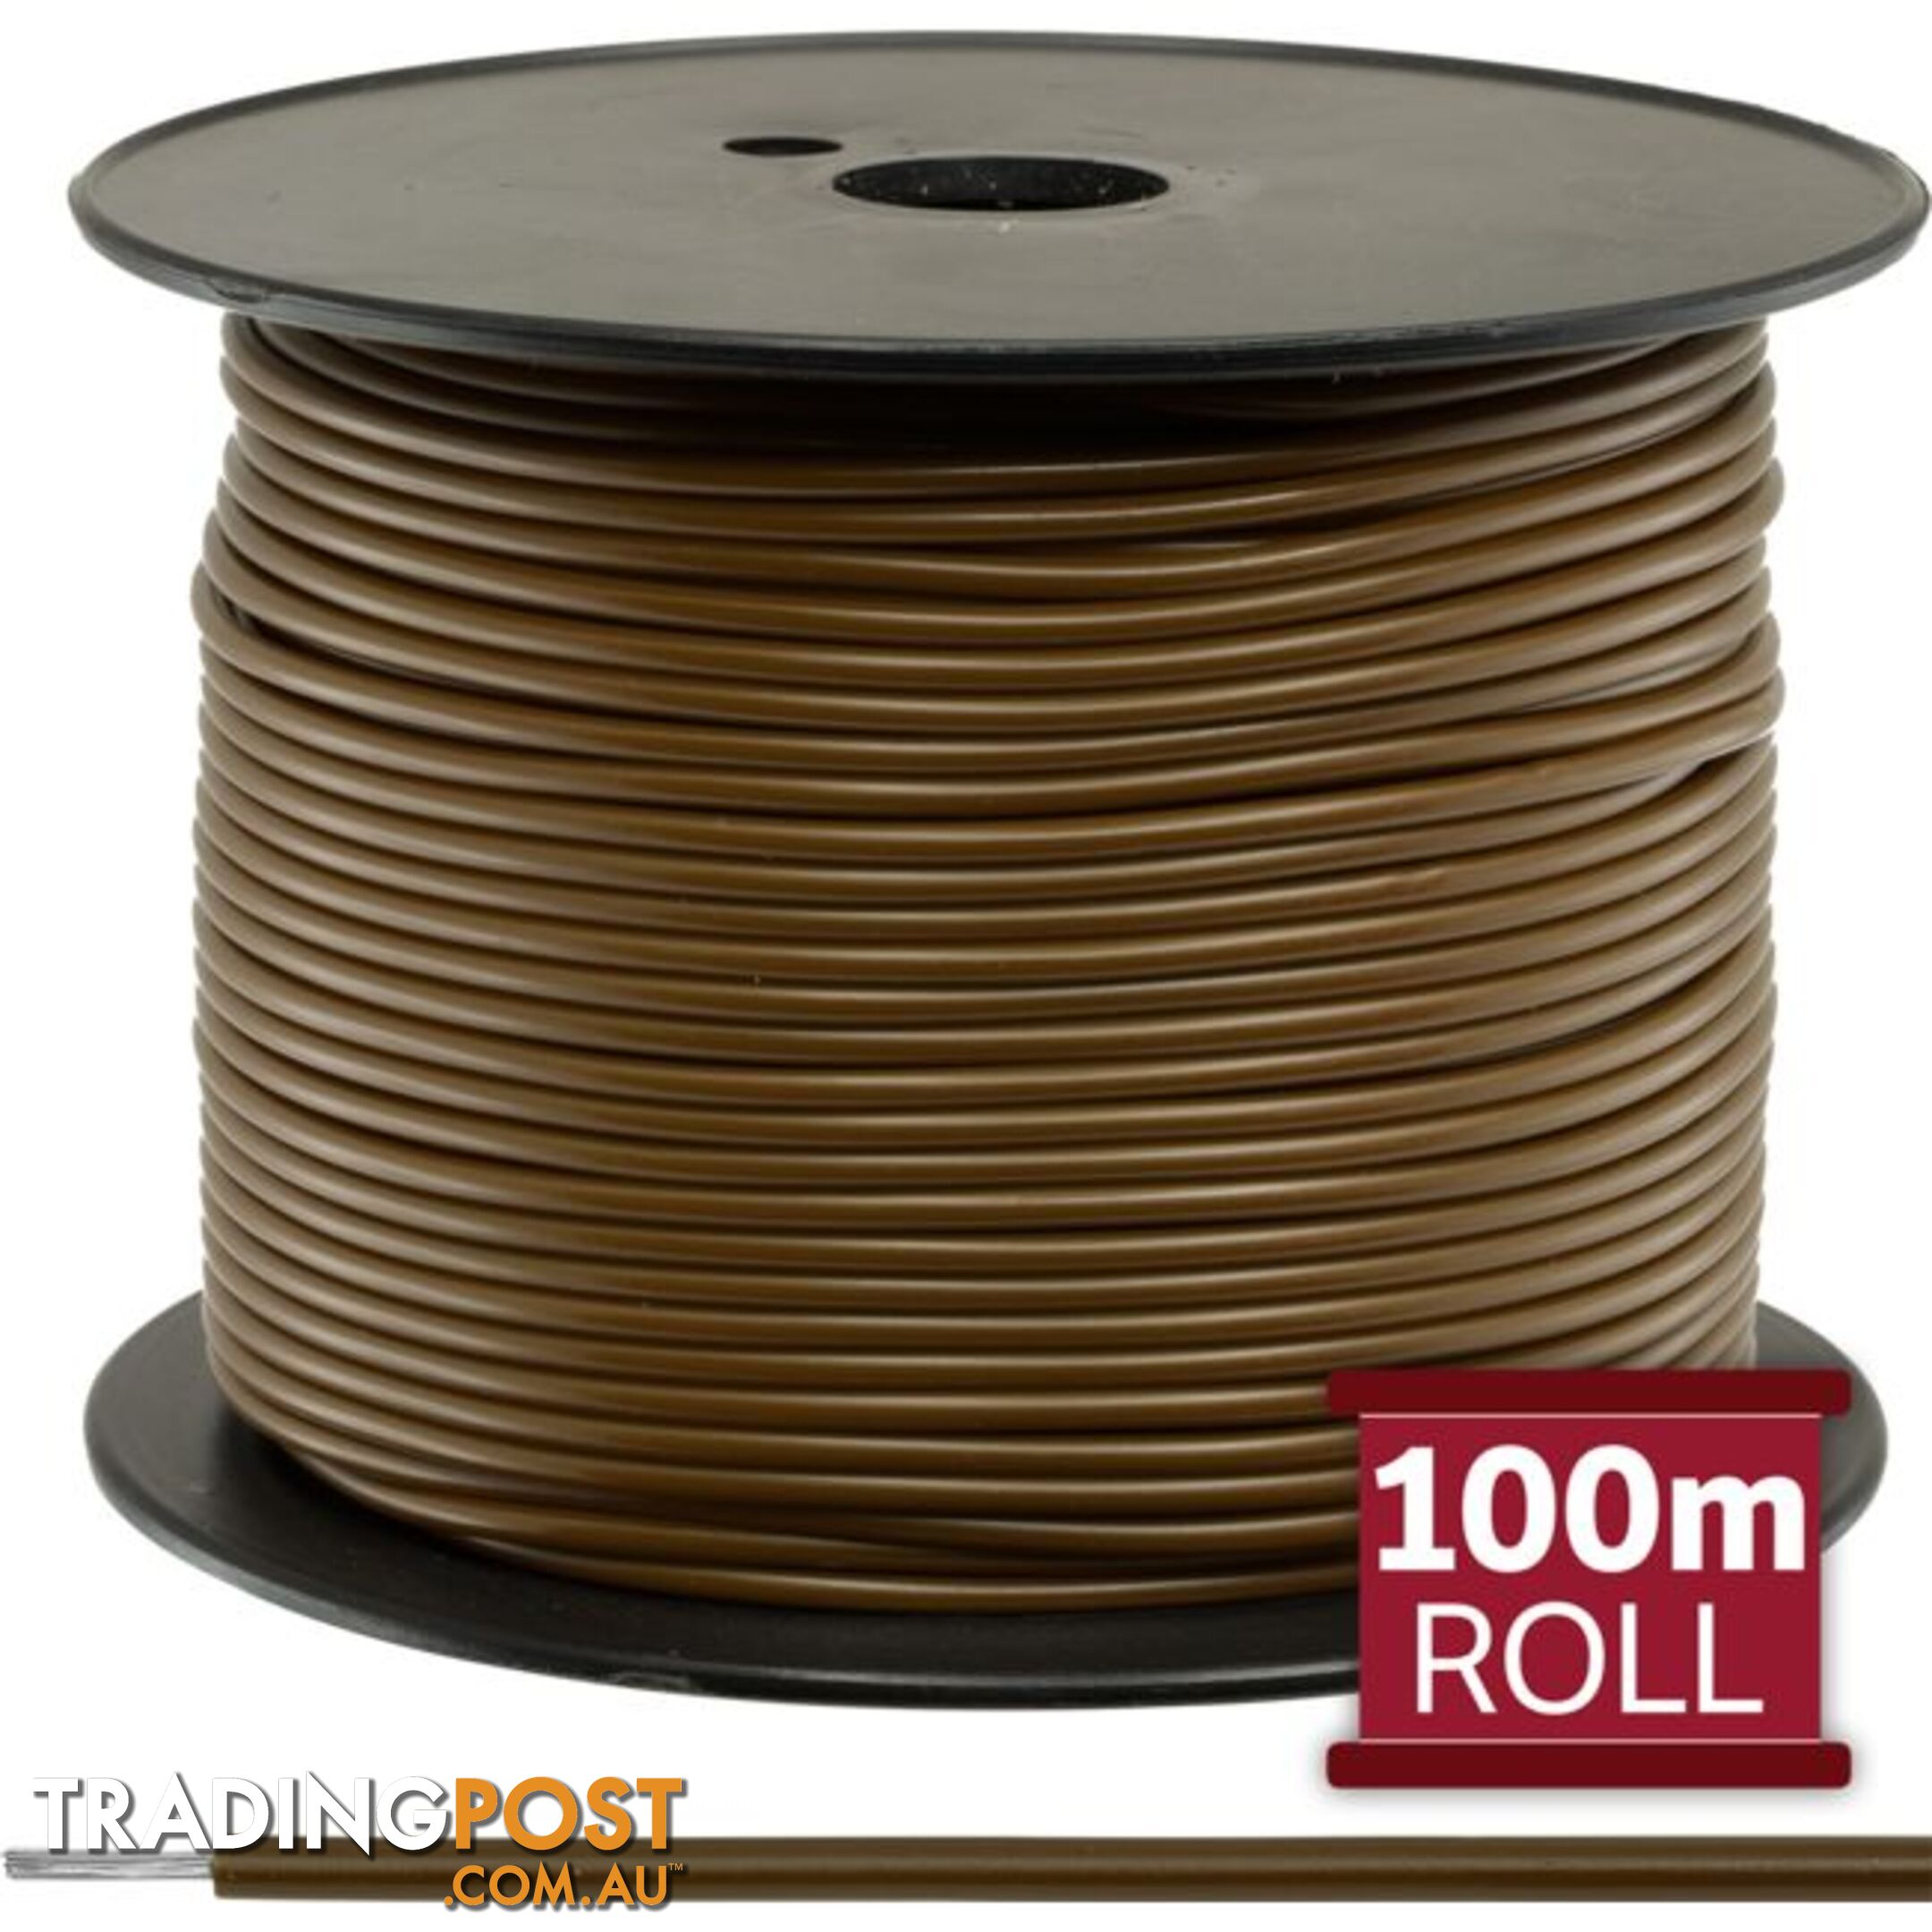 24-.2BR-100M 100M BROWN HOOKUP WIRE/CABLE PER 100M REEL ROLL DOSS 7A